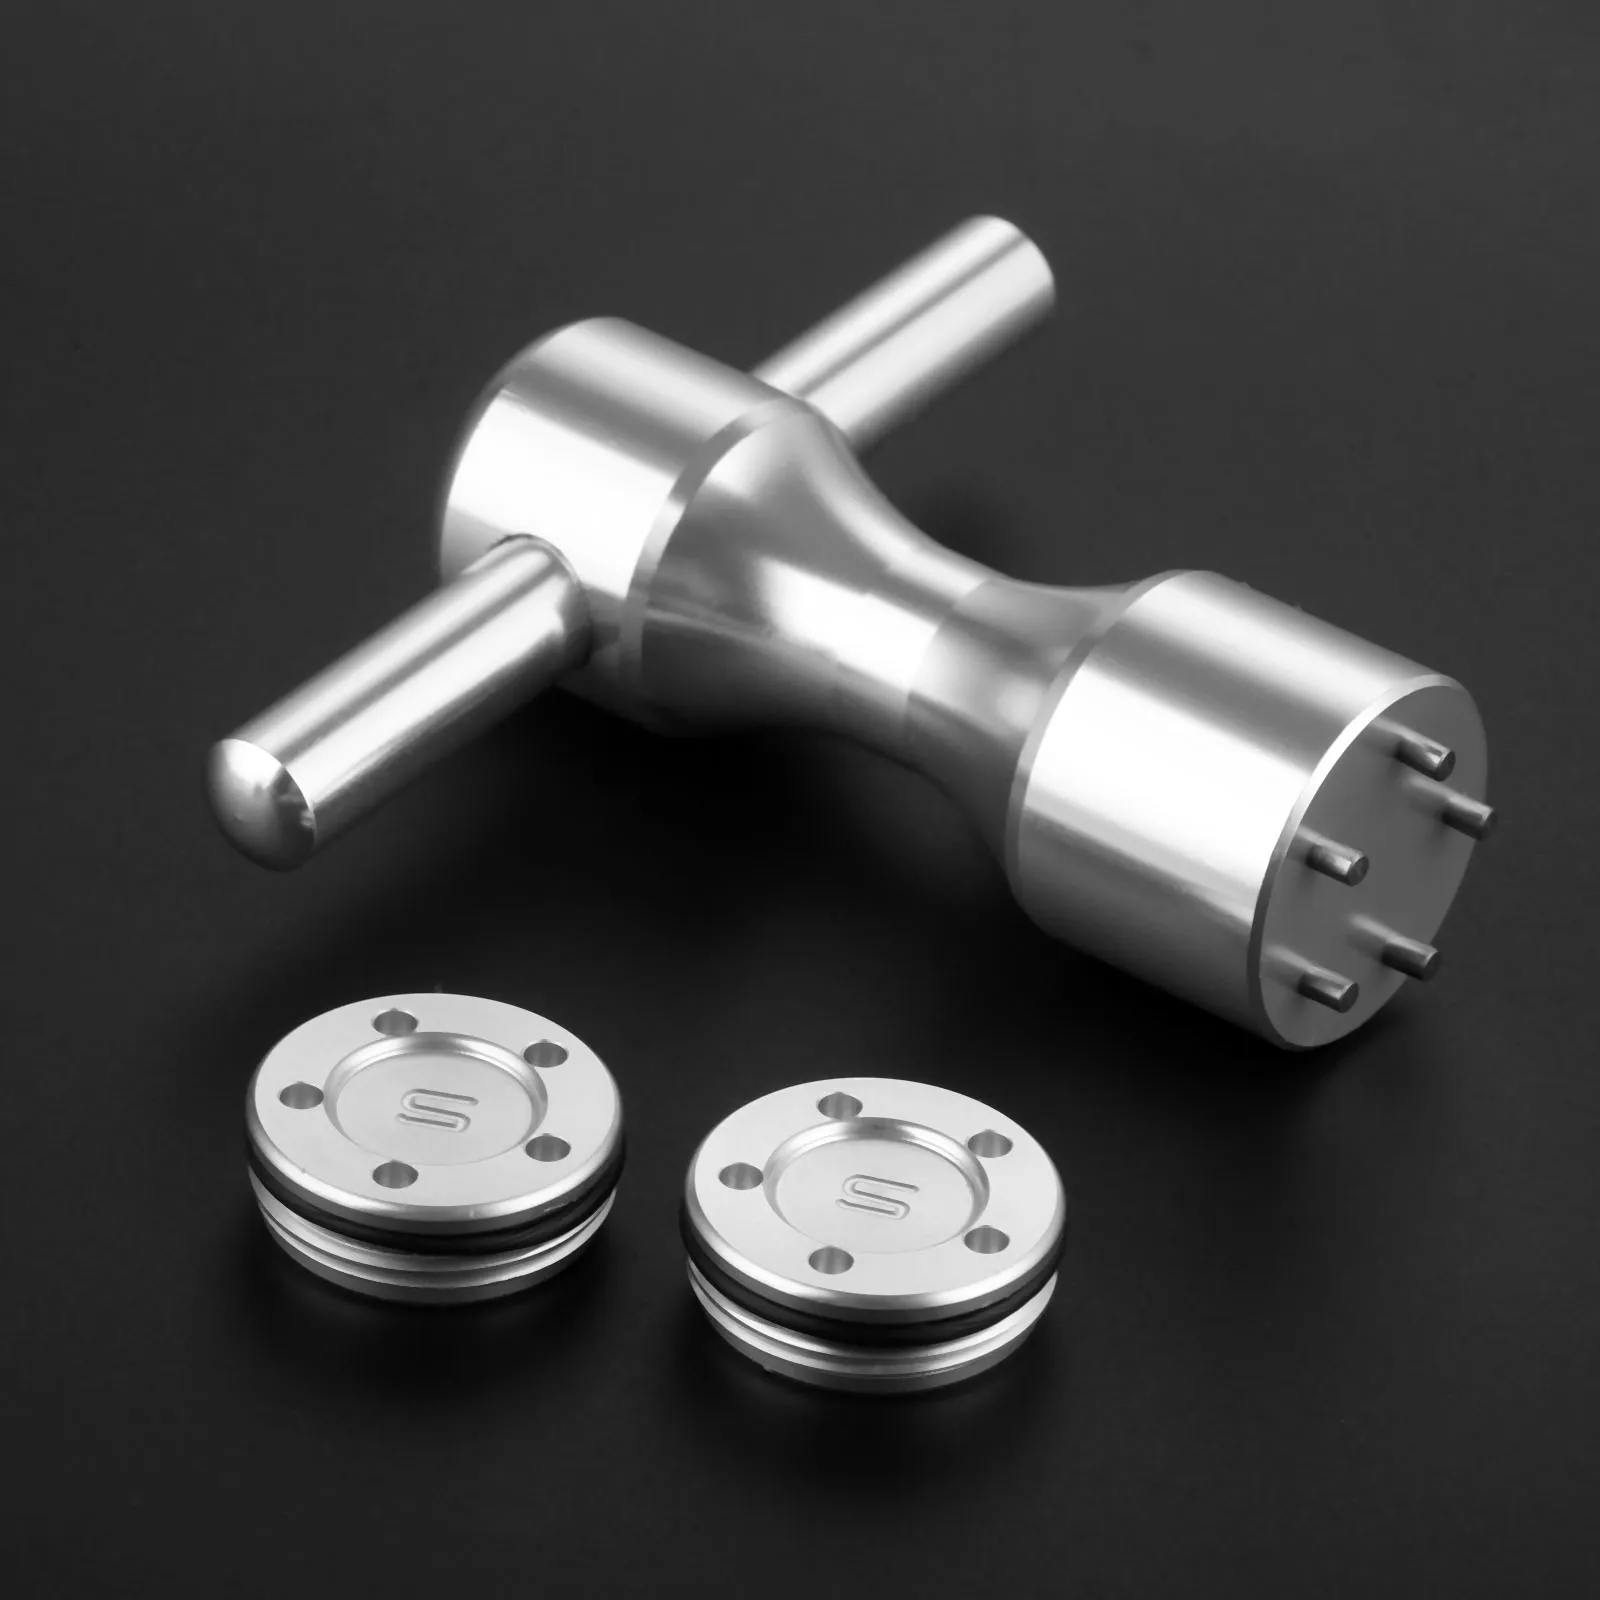 1 Pair (2pcs) Golf Weights With Wrench Tool For Scotty Cameron Putters Golf Club Head Accessories 5g 10g 15g 20g 25g 30g 35g 40g